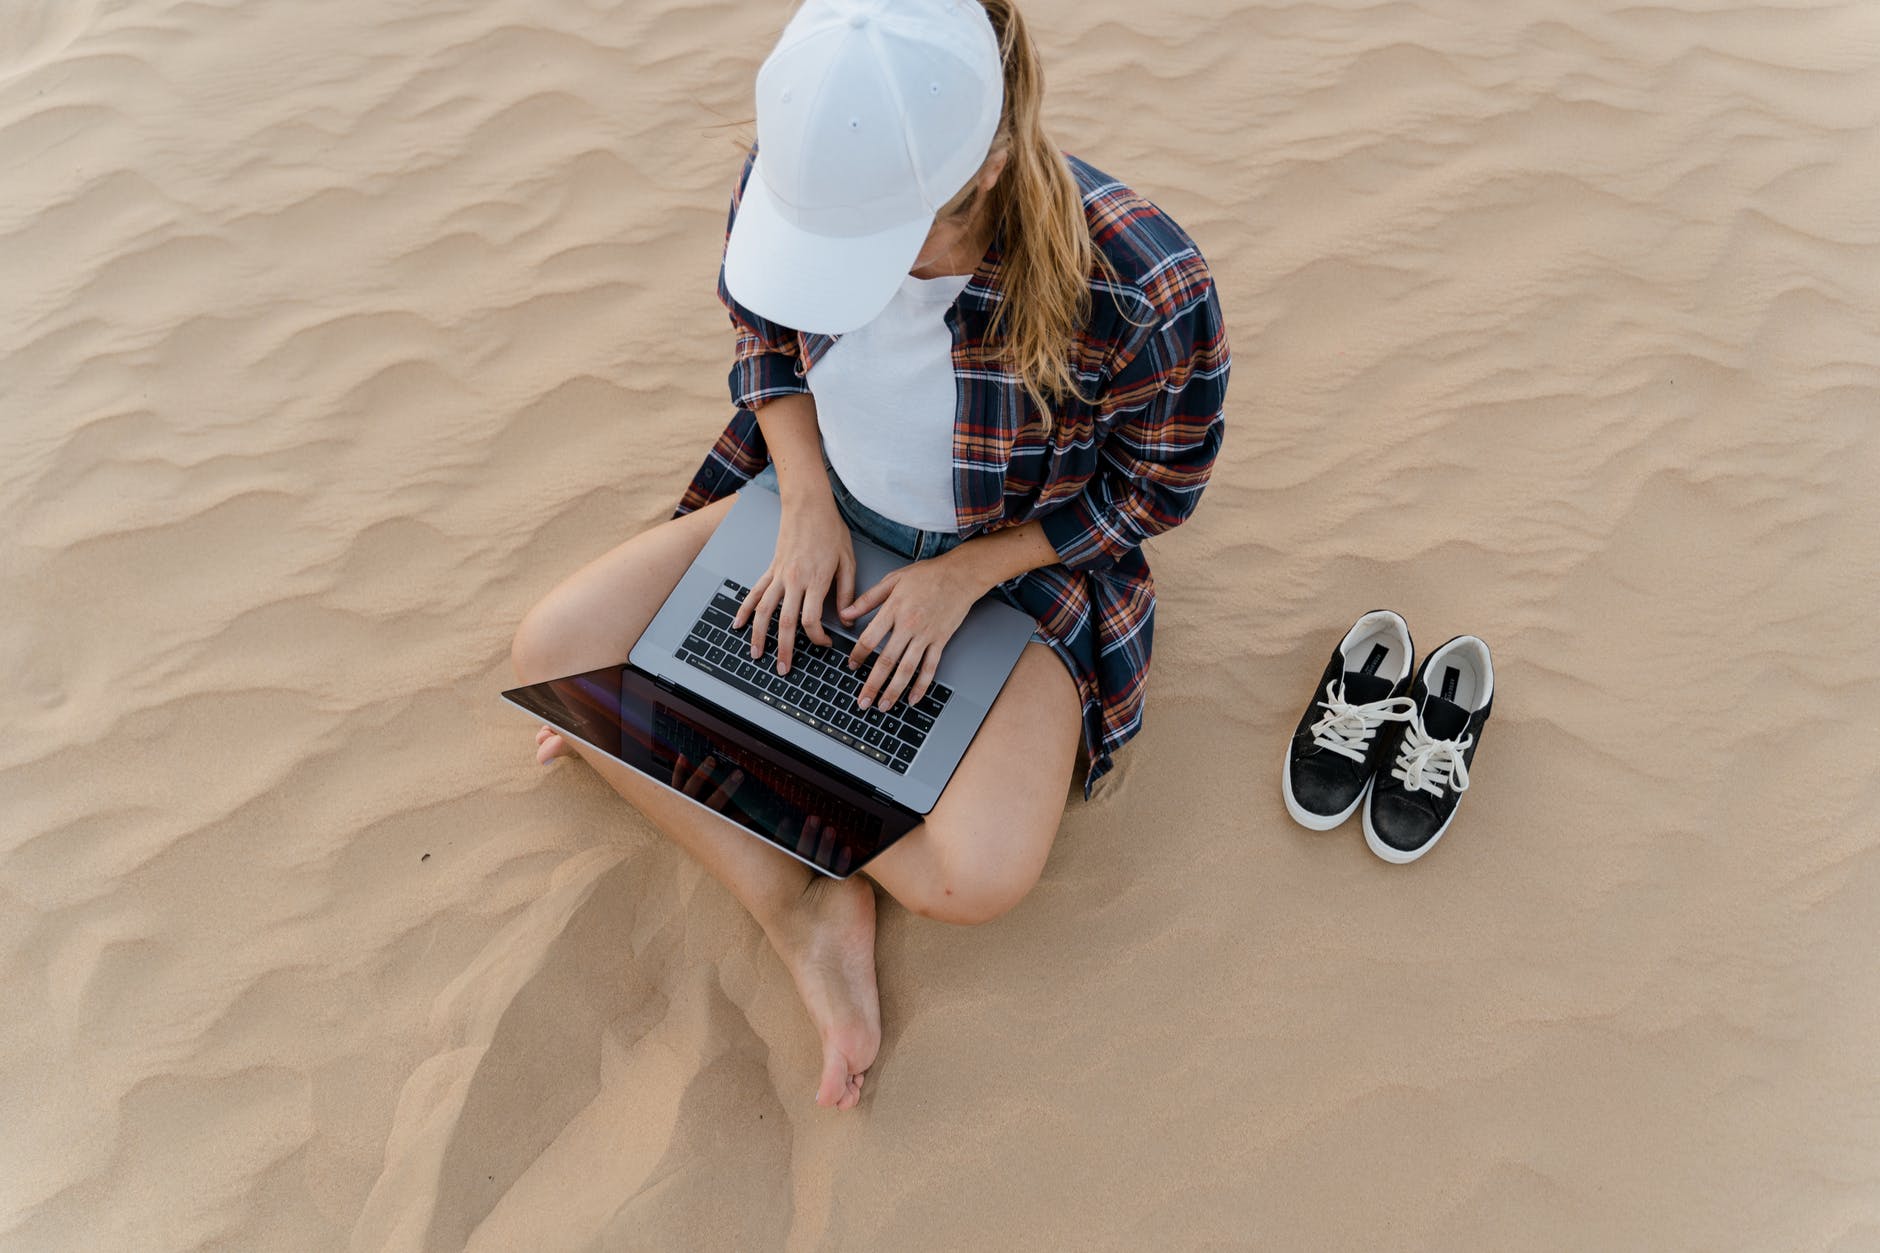 a woman typing on her laptop while sitting on sand, The Truth About Employee Benefits